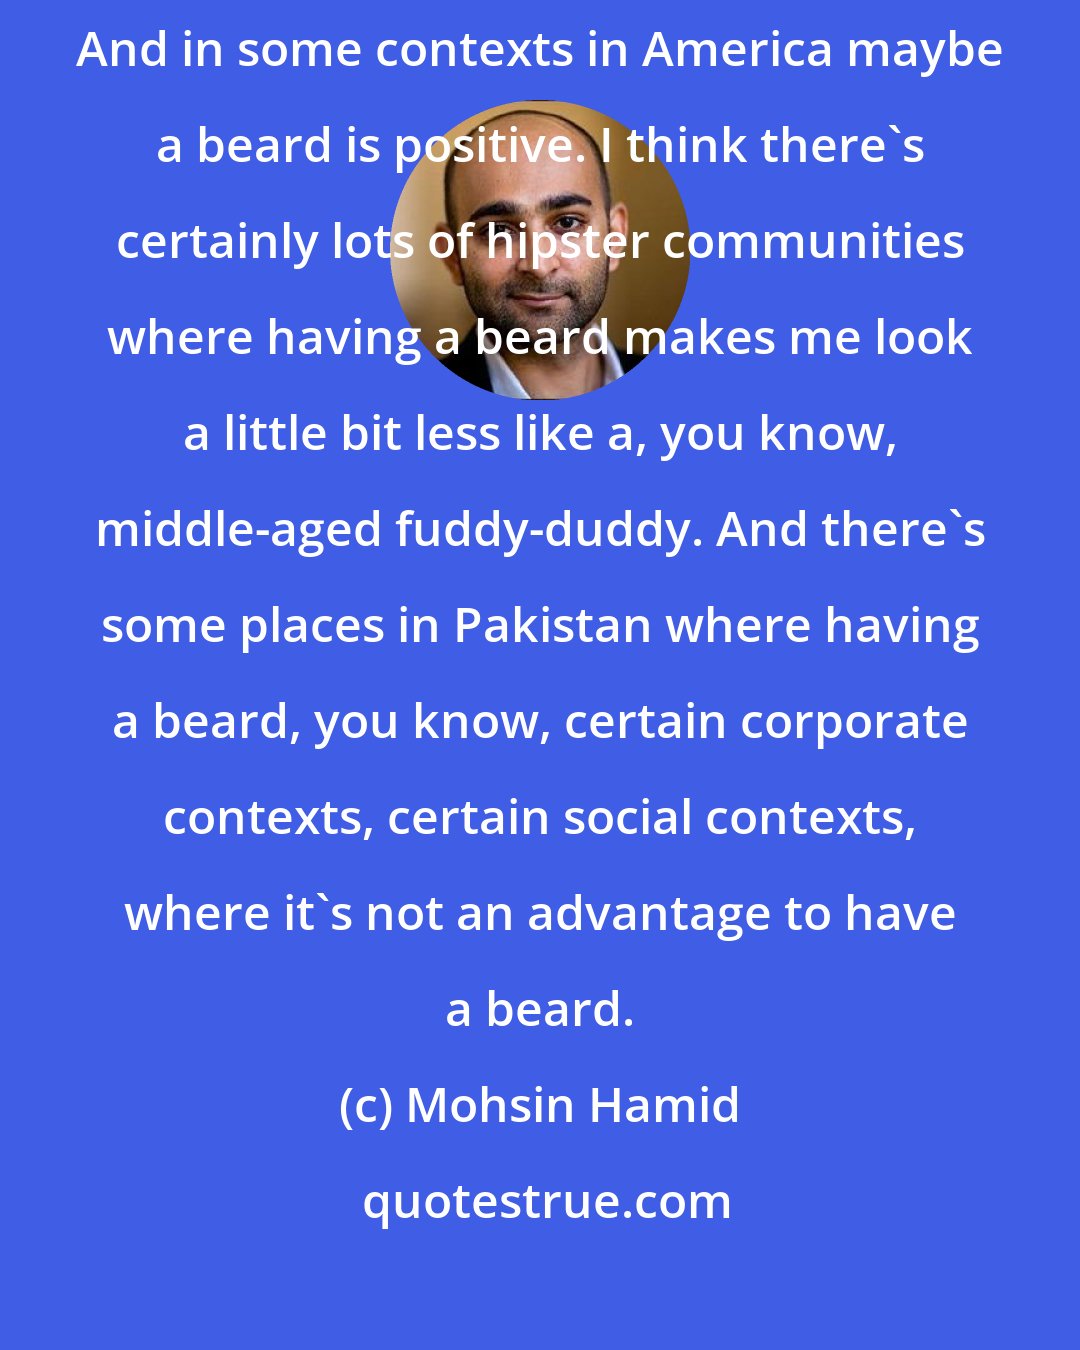 Mohsin Hamid: In some contexts in Pakistan maybe a beard is negative. It depends. And in some contexts in America maybe a beard is positive. I think there's certainly lots of hipster communities where having a beard makes me look a little bit less like a, you know, middle-aged fuddy-duddy. And there's some places in Pakistan where having a beard, you know, certain corporate contexts, certain social contexts, where it's not an advantage to have a beard.